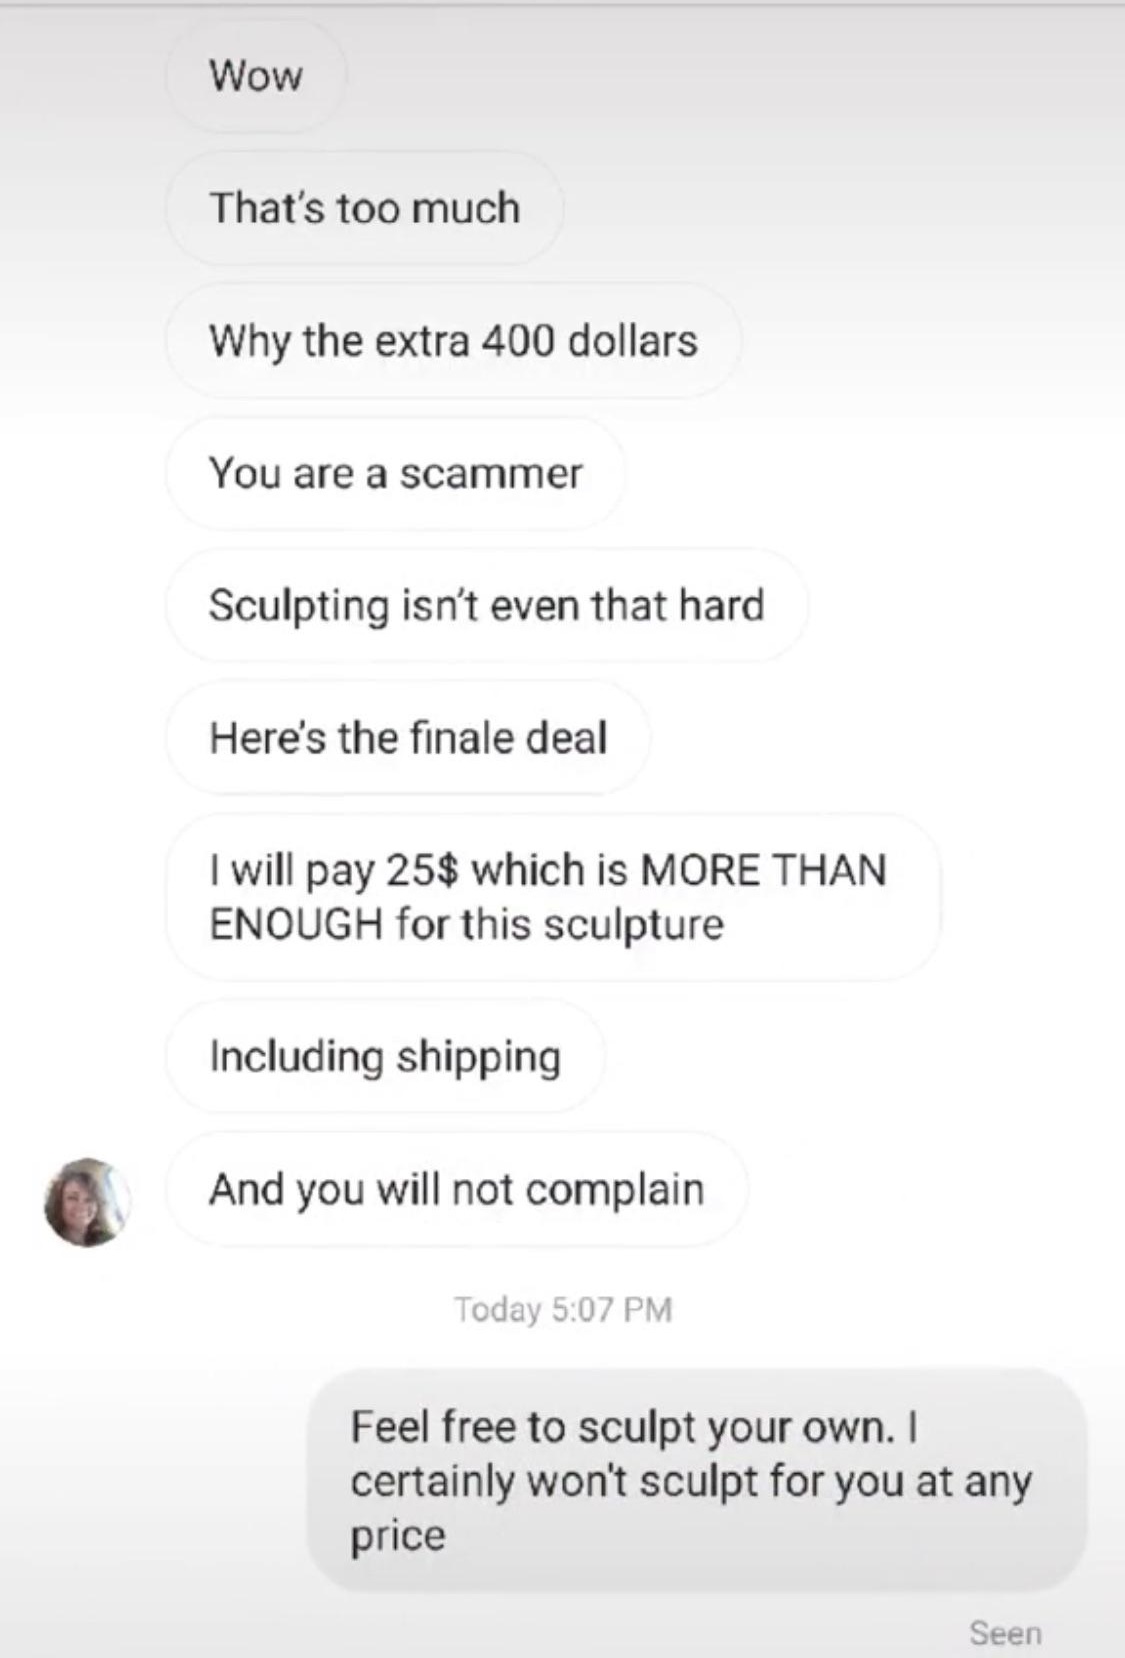 wow that's too much why the extra 400 dollars you are a scammer sculpting isn't even that hard here's the final deal. I will pay $25 which is more than enough for this sculpture including shipping and you will not complain - feel free to sculpt your own. 